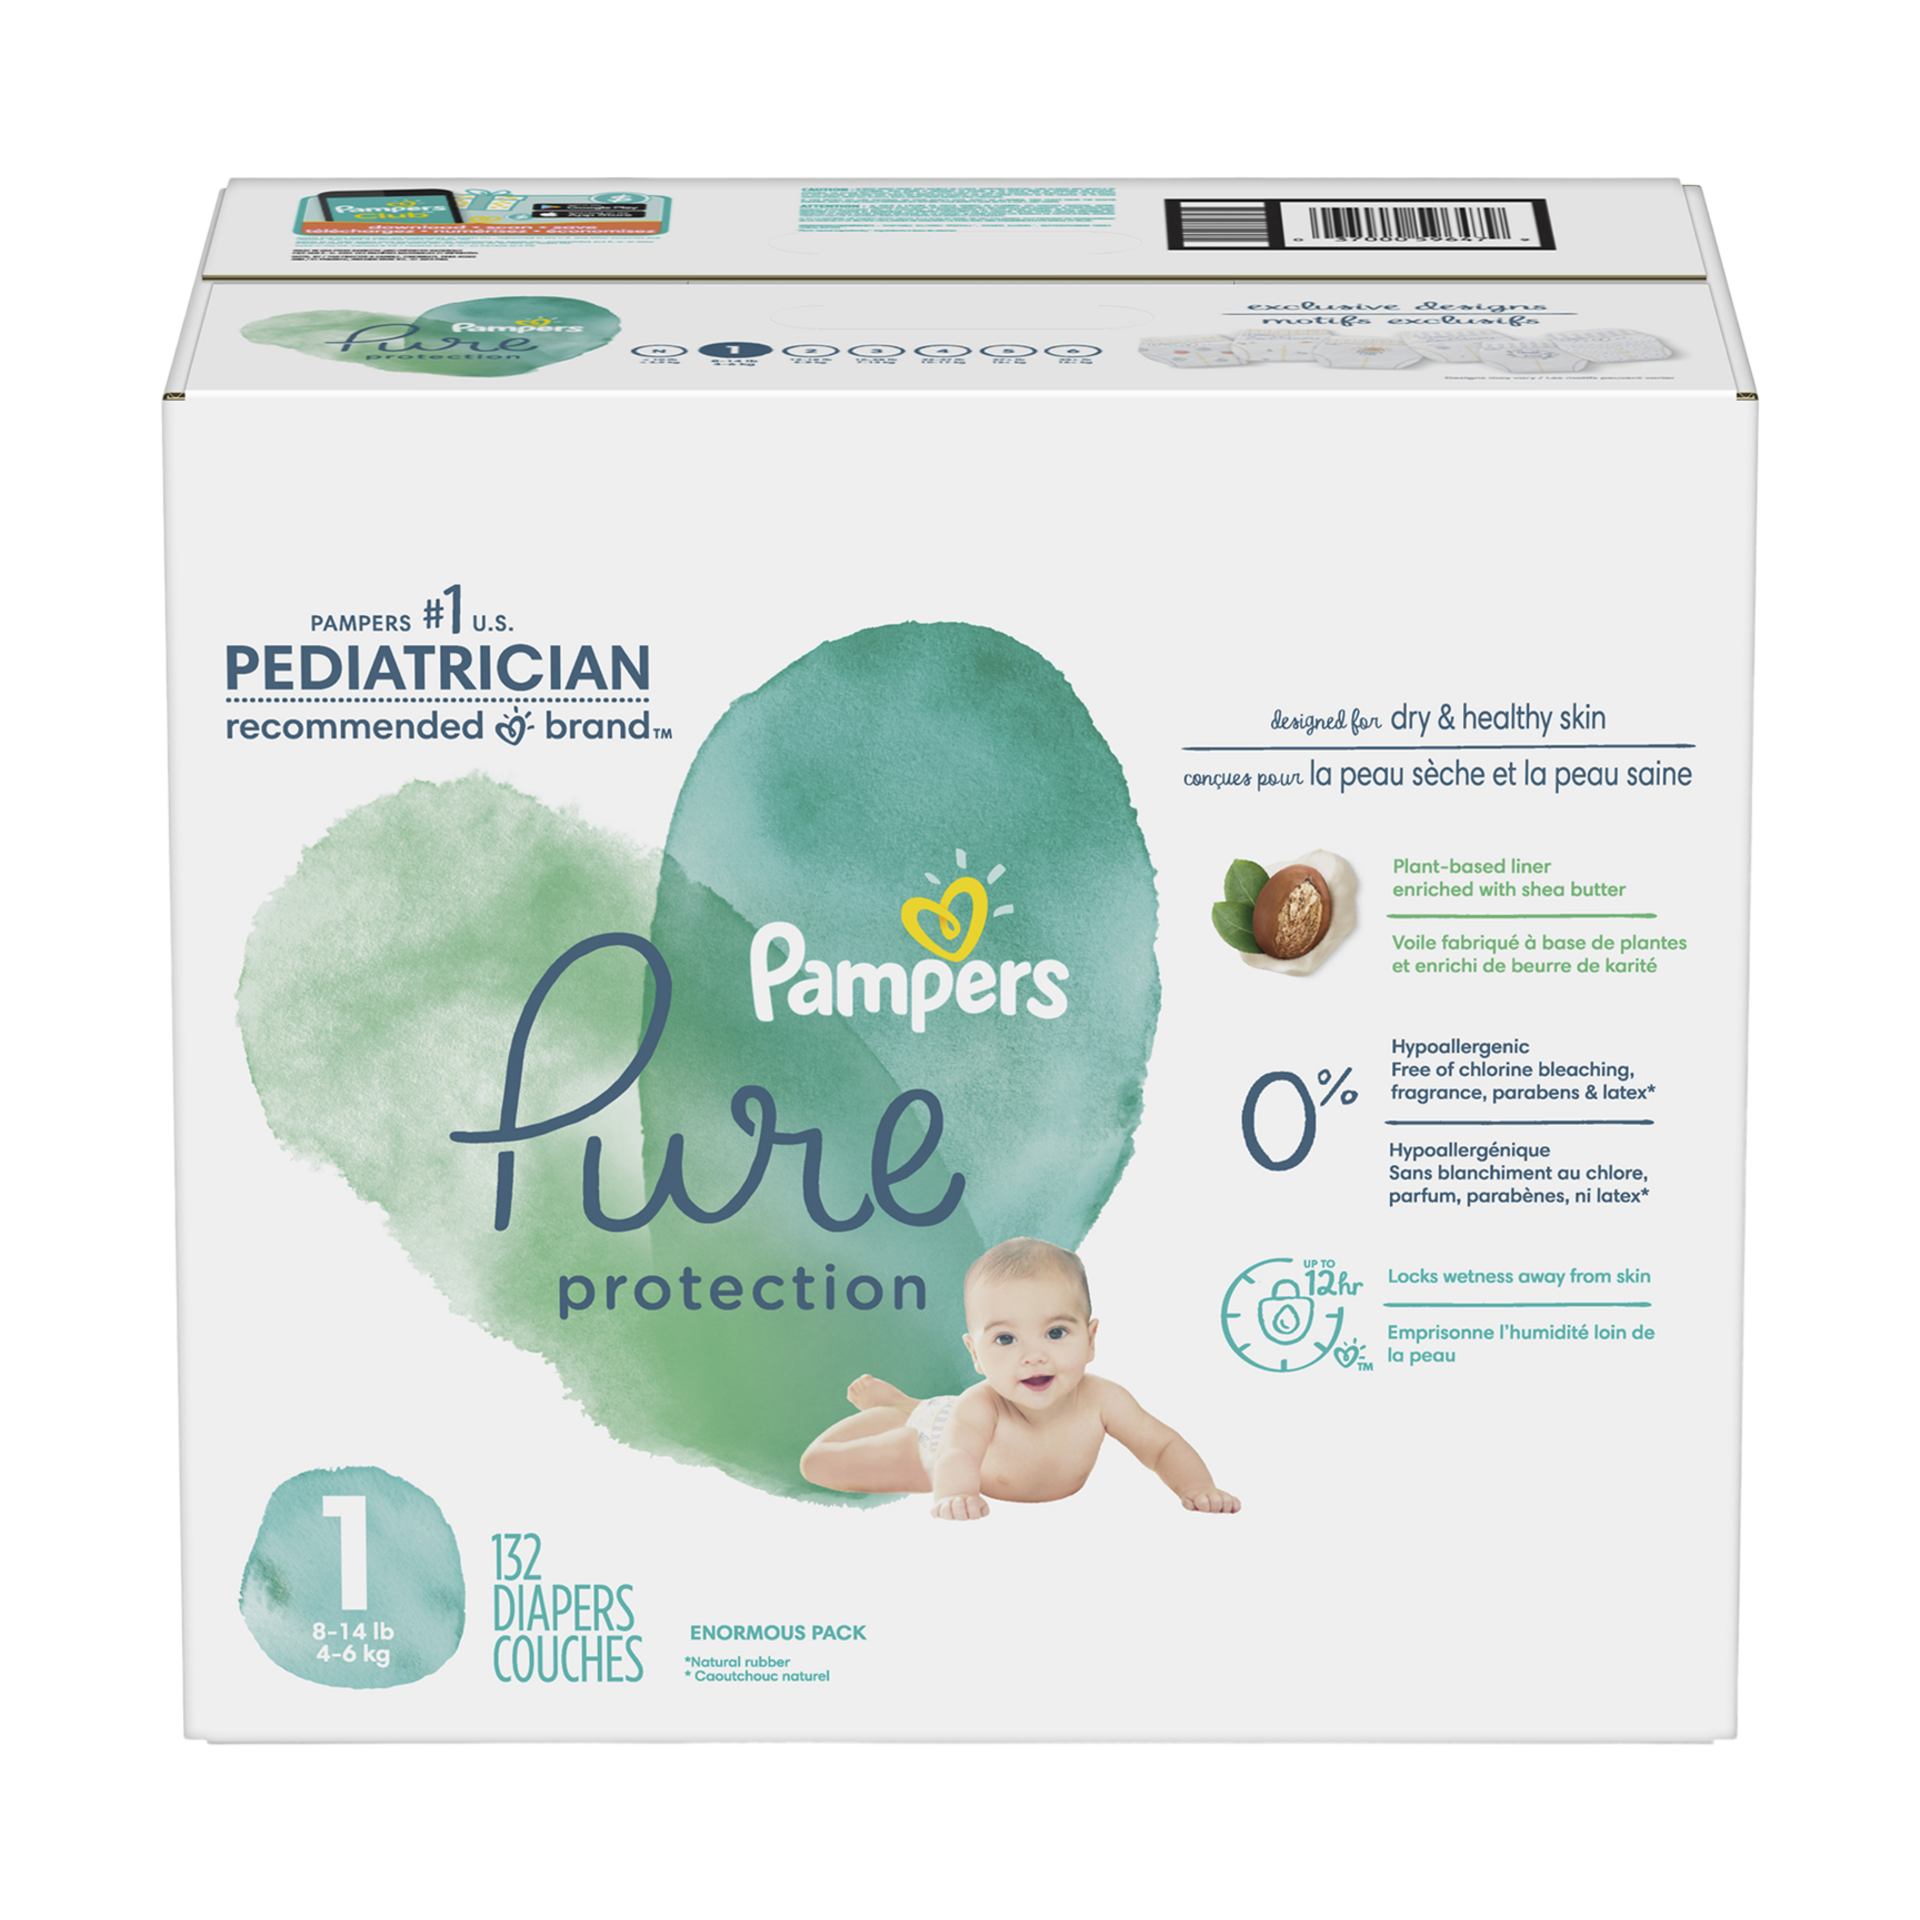 pampers pure size 2 diapers